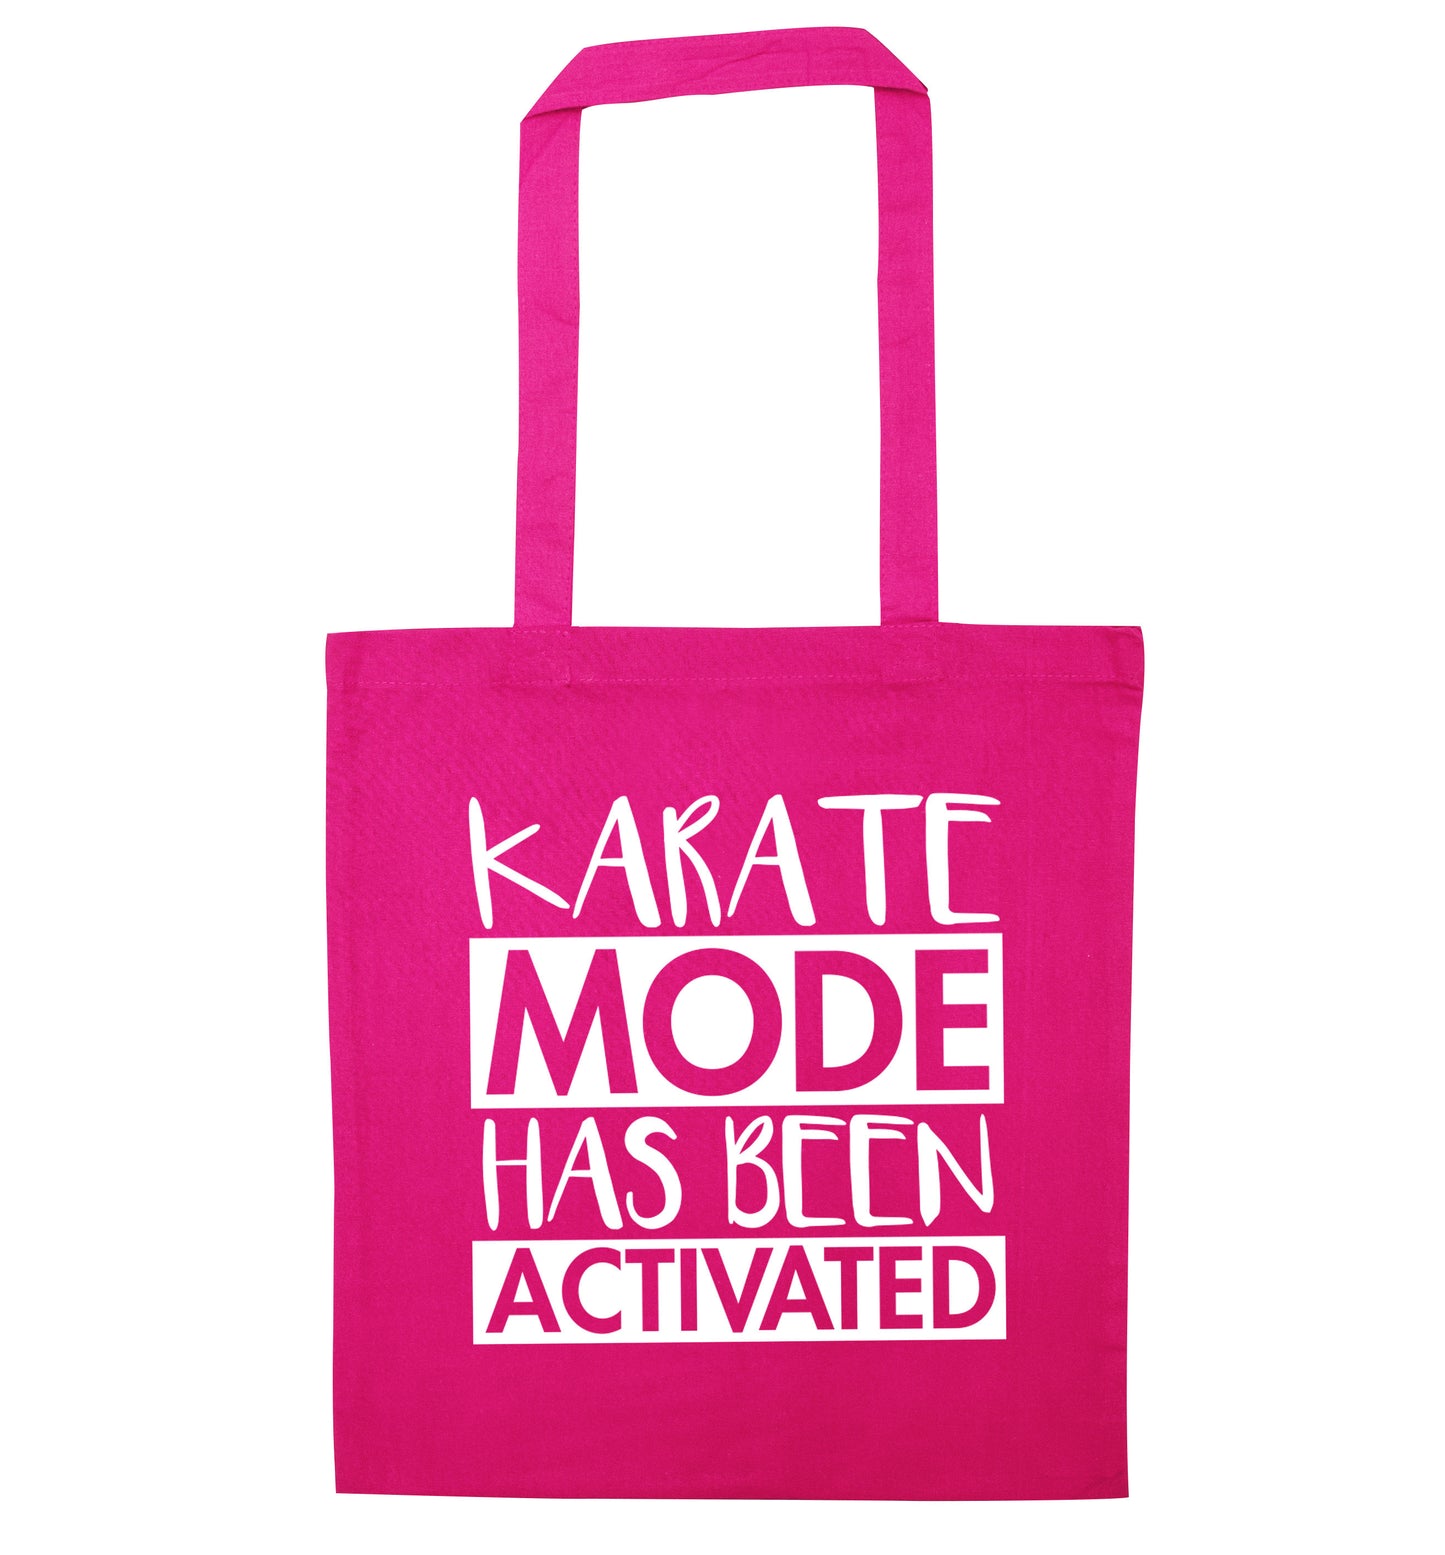 Karate mode activated pink tote bag